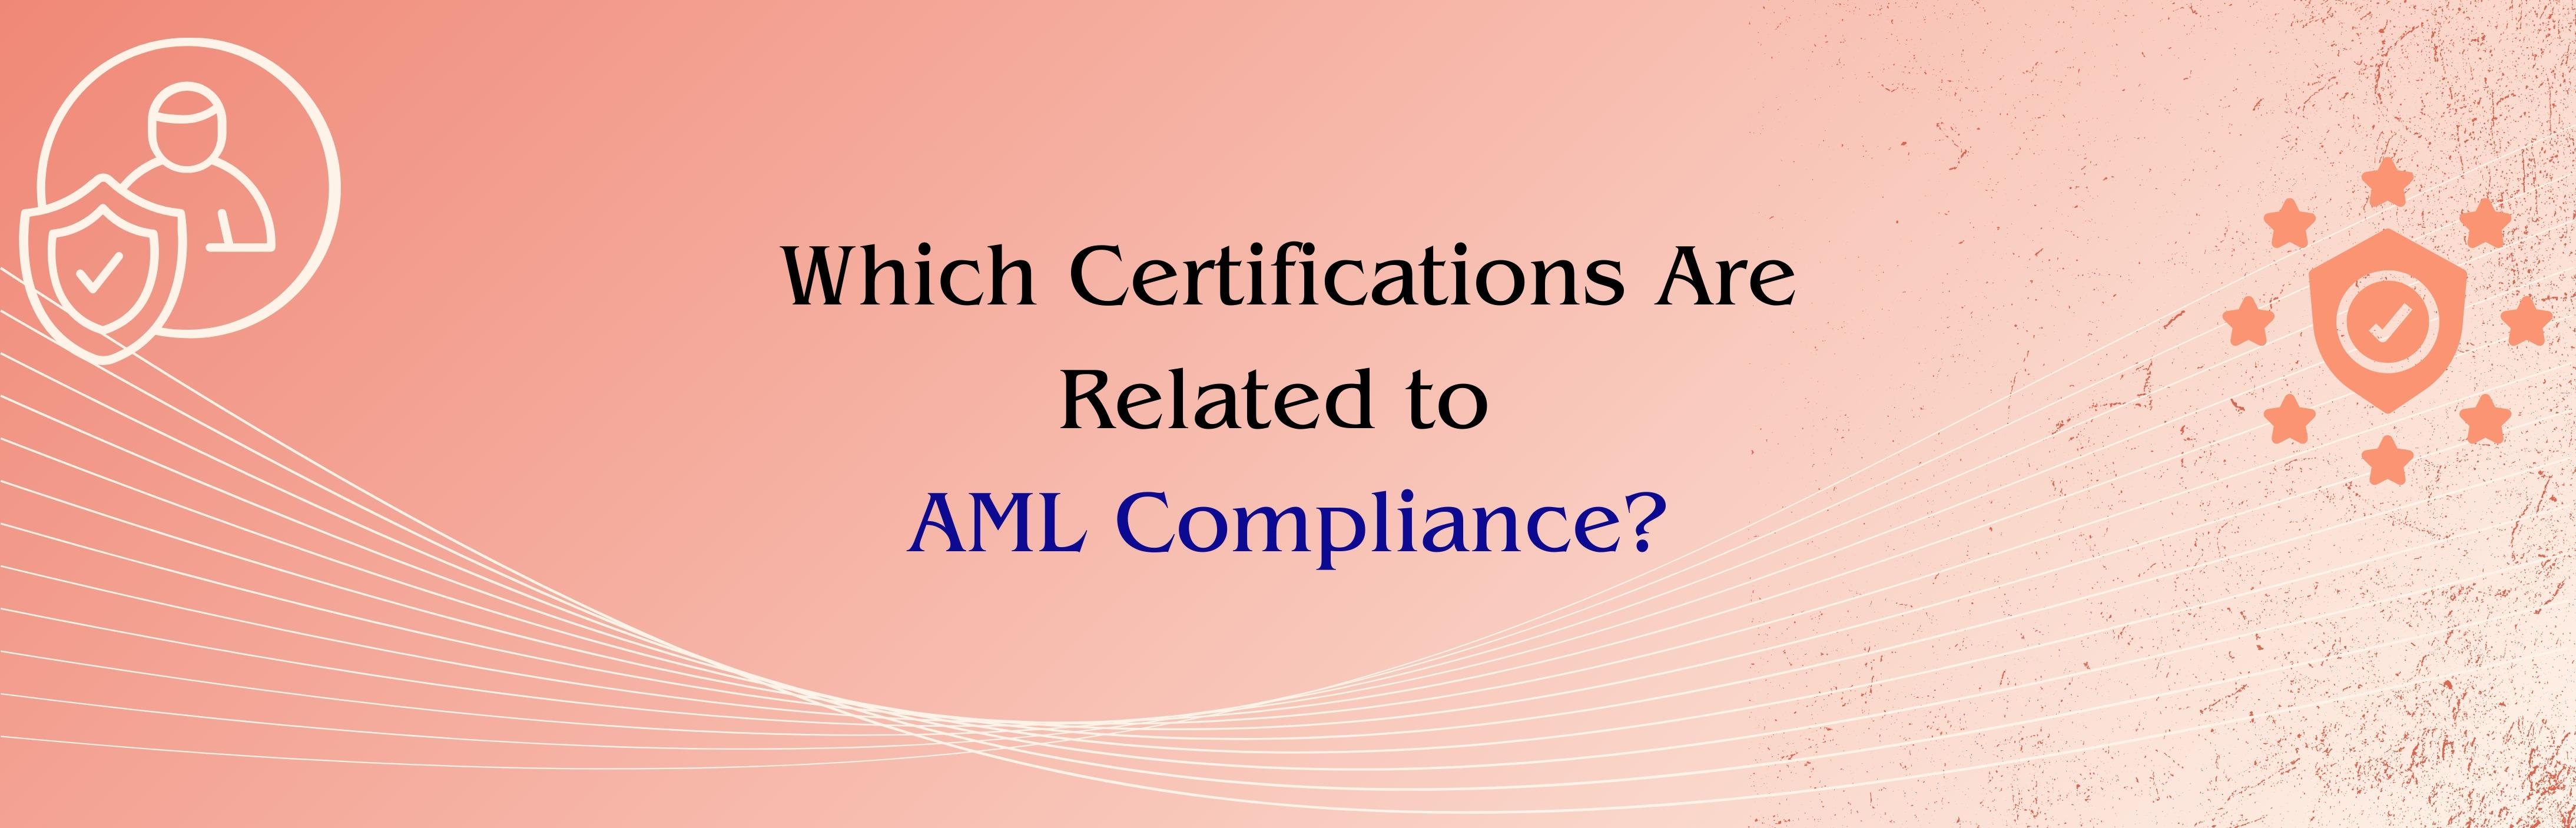 Which Certifications Are Related to AML Compliance